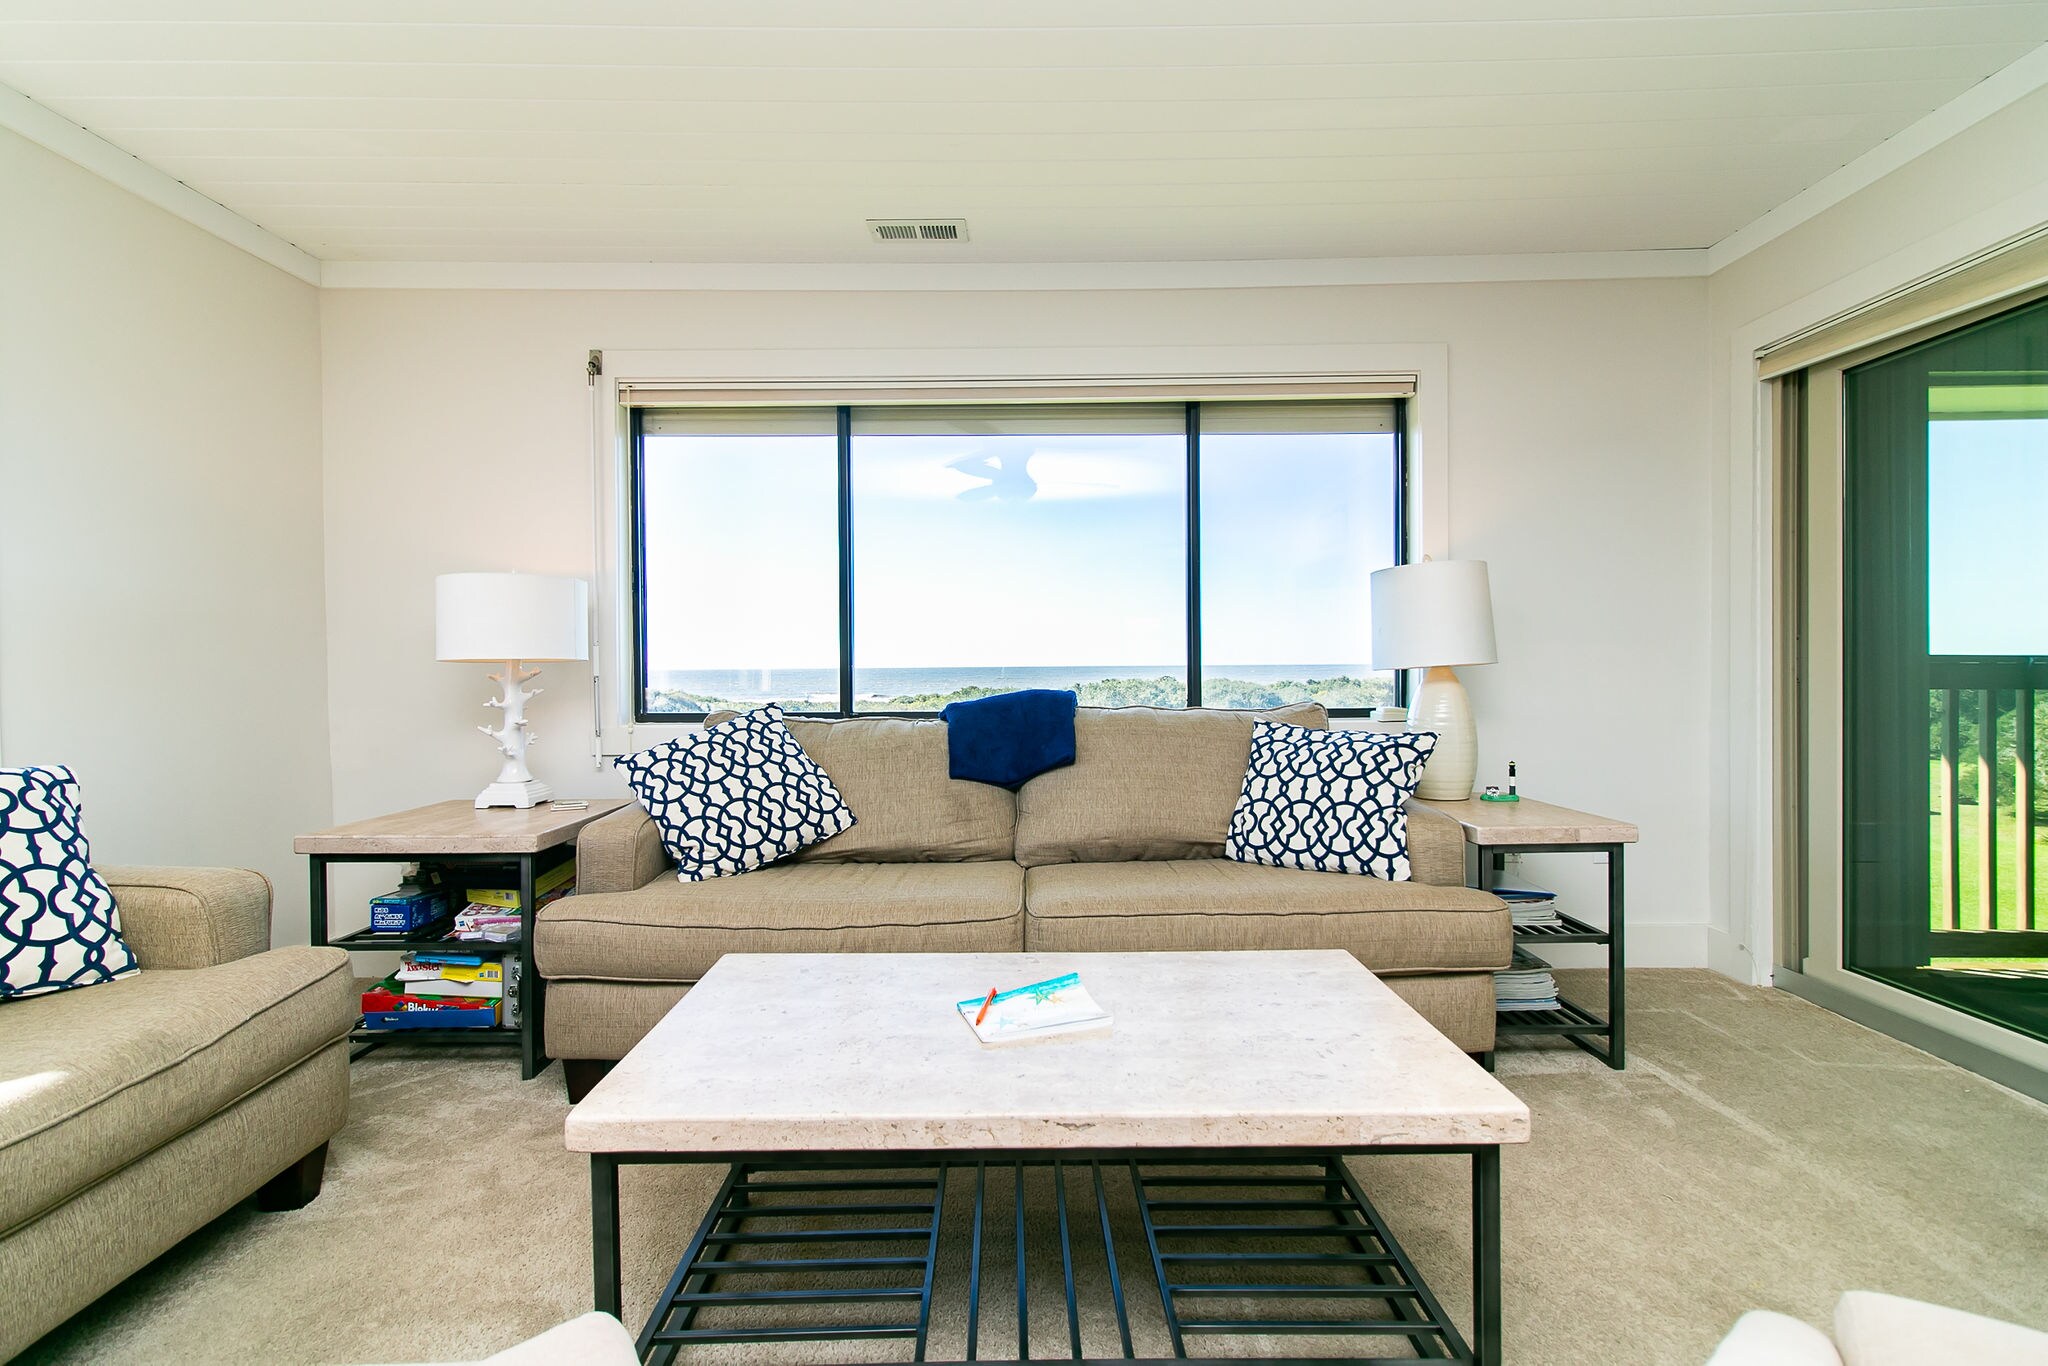 Property Image 2 - Breathtaking Ocean Front Condo at Caswell Beach.  Norah Patrick’s Hideaway